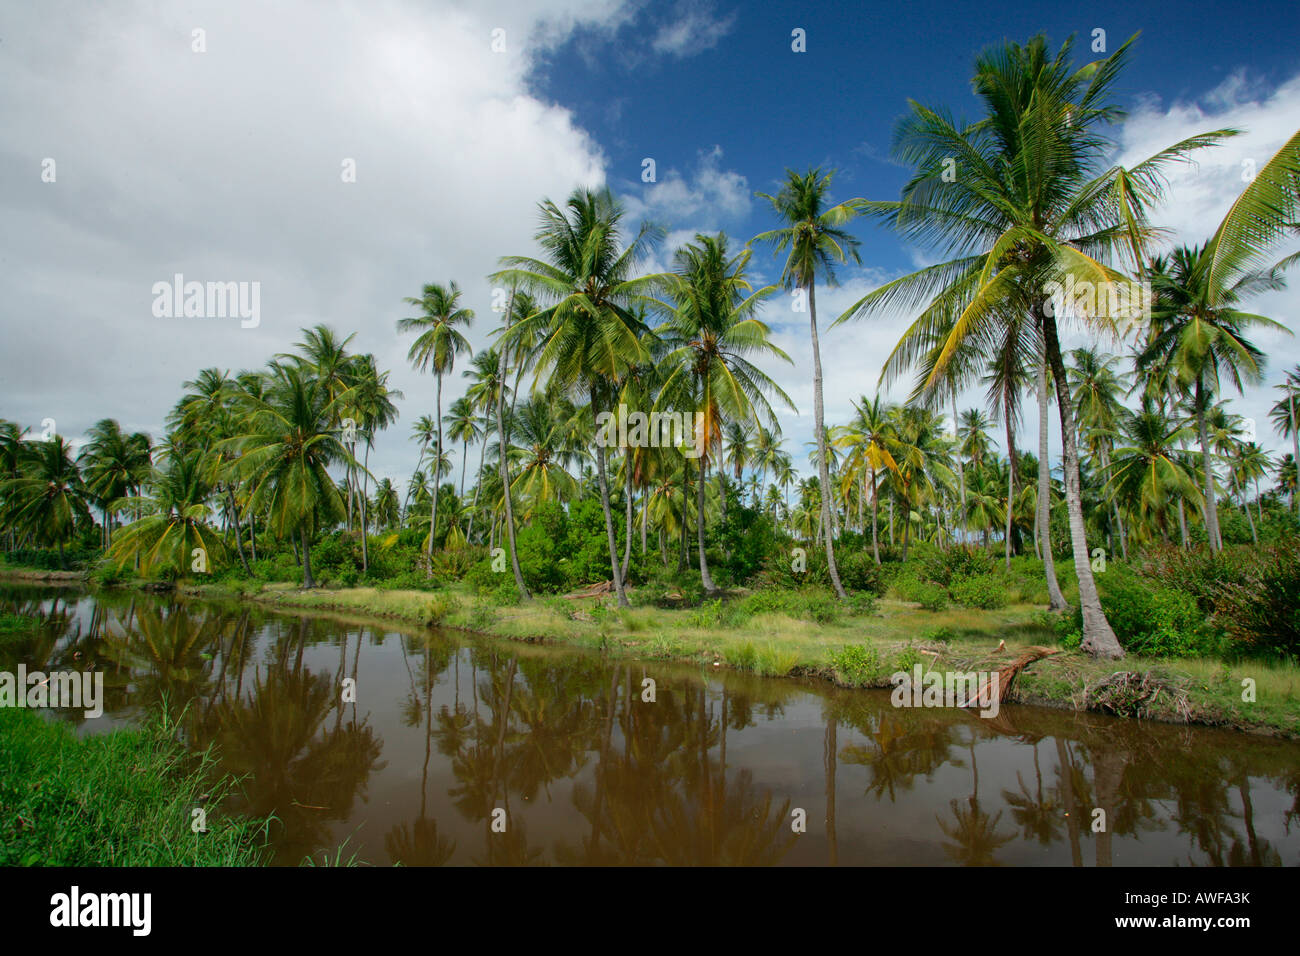 Coconut plantation, coconut palms, coconut processing, Georgetown, Guyana, South America Stock Photo